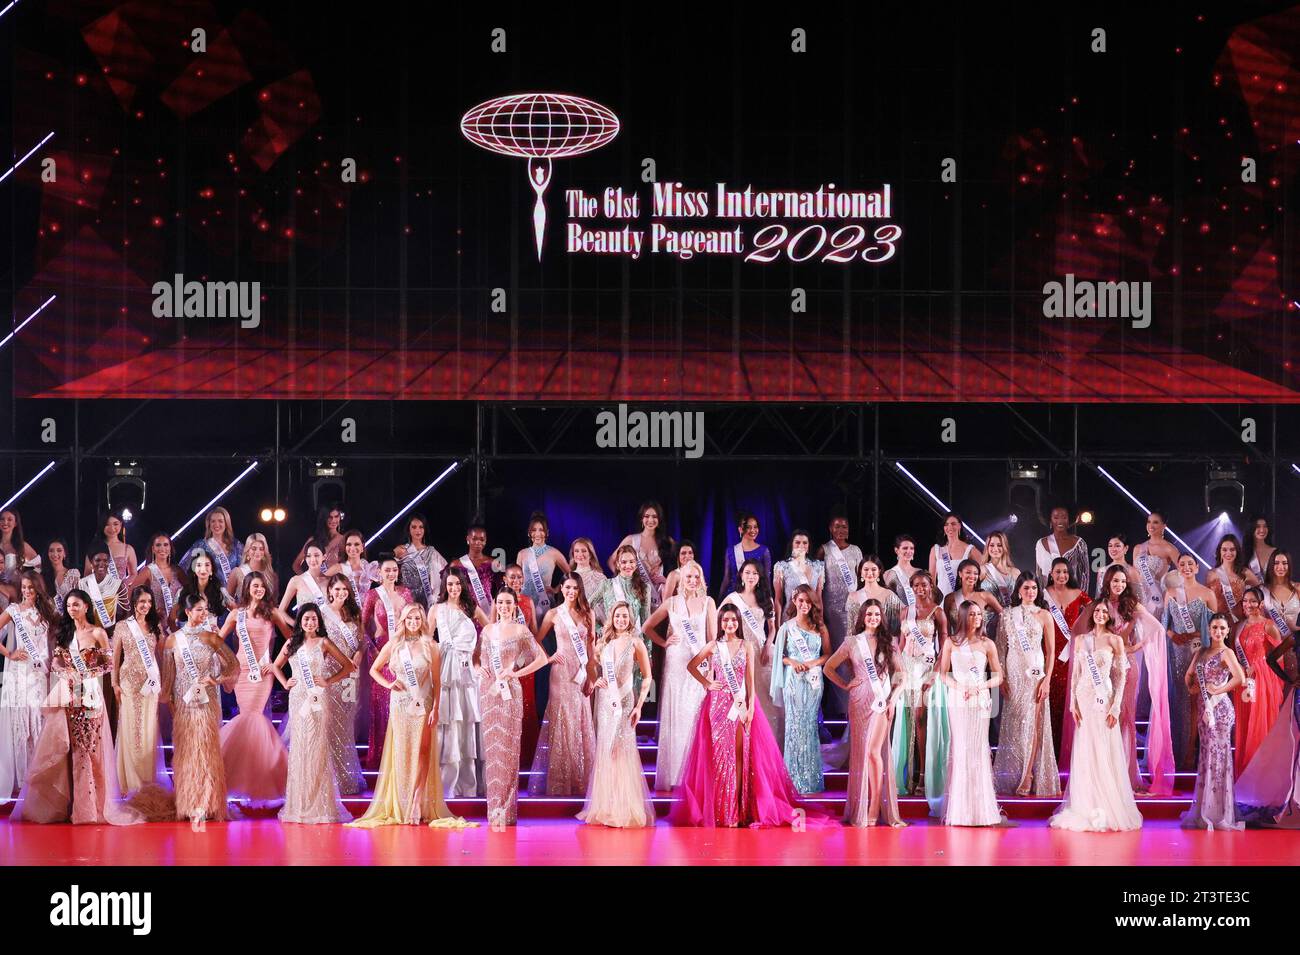 Tokyo, Japan. 26th Oct, 2023. 70 beauties in evening dresses pose at the 61st Miss International beauty pageant in Tokyo on Thursday, October 26, 2023. Miss Venezuela Andrea Rubio is crowned as the Miss International 2023 while Miss Colombia Sofia Osio Luna won runner-up and Miss Peru Camilia Diaz Daneri finished the 2nd runner up. (photo by Yoshio Tsunoda/AFLO) Stock Photo